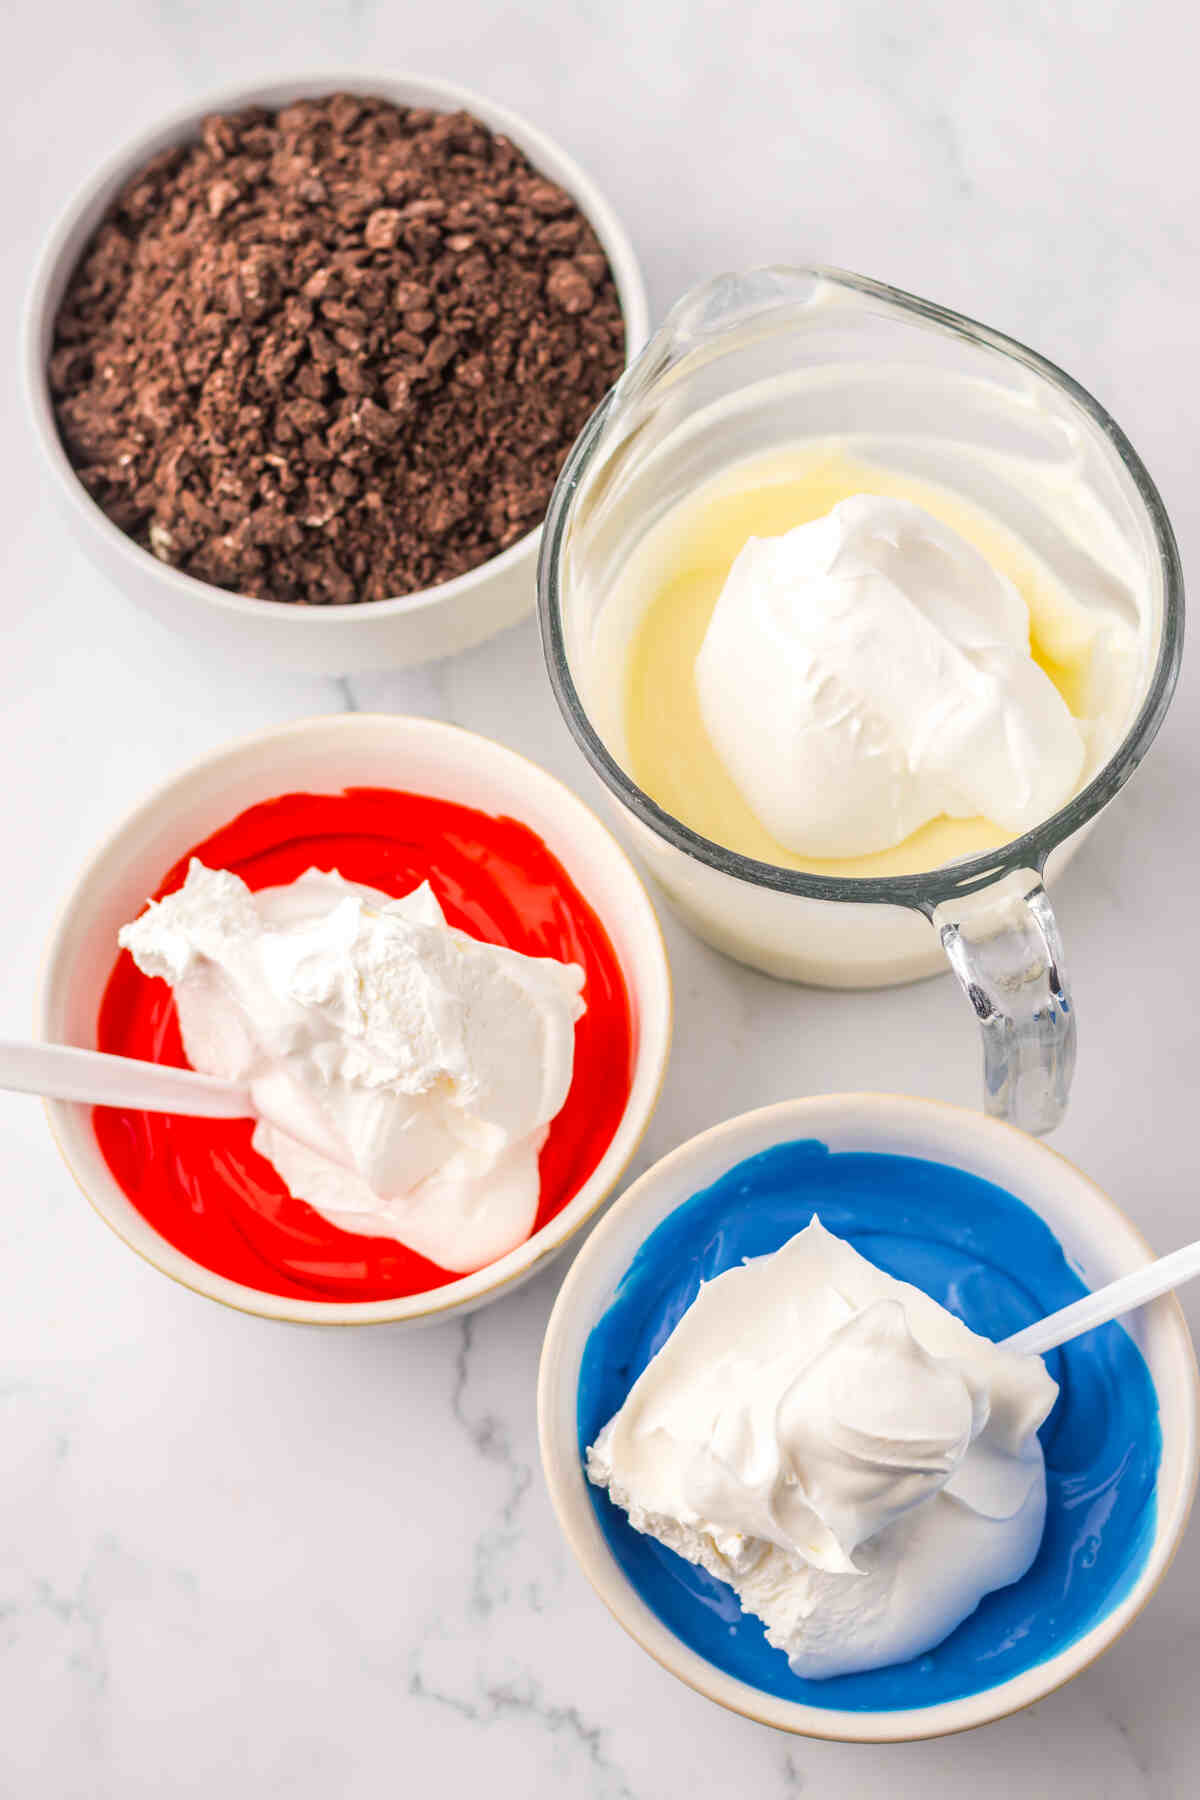 whipped topping being added to the three bowls of colored pudding mixes.